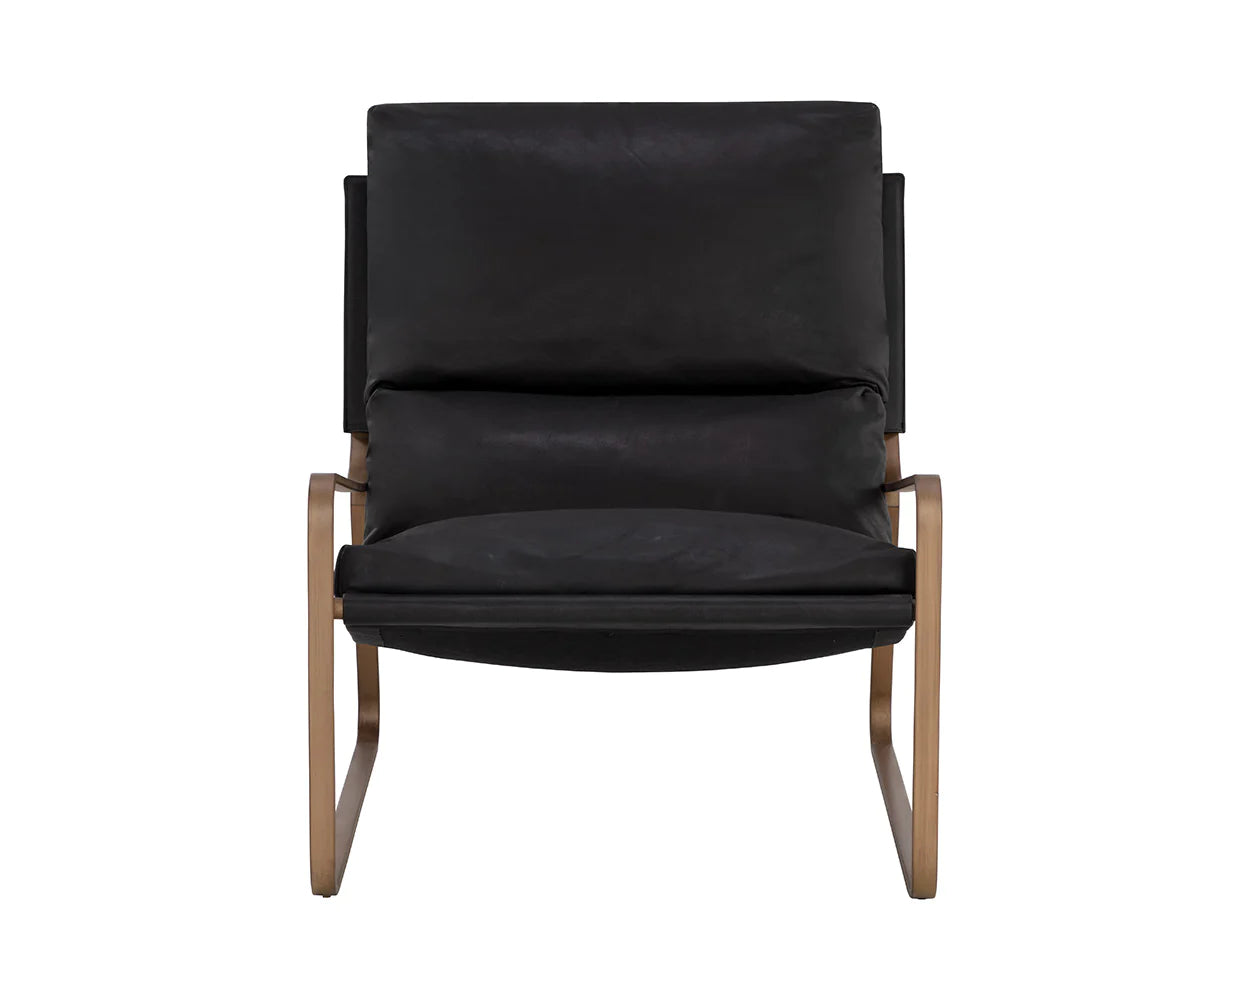 ZANCOR LOUNGE CHAIR - ANTIQUE BRASS - CHARCOAL BLACK LEATHER